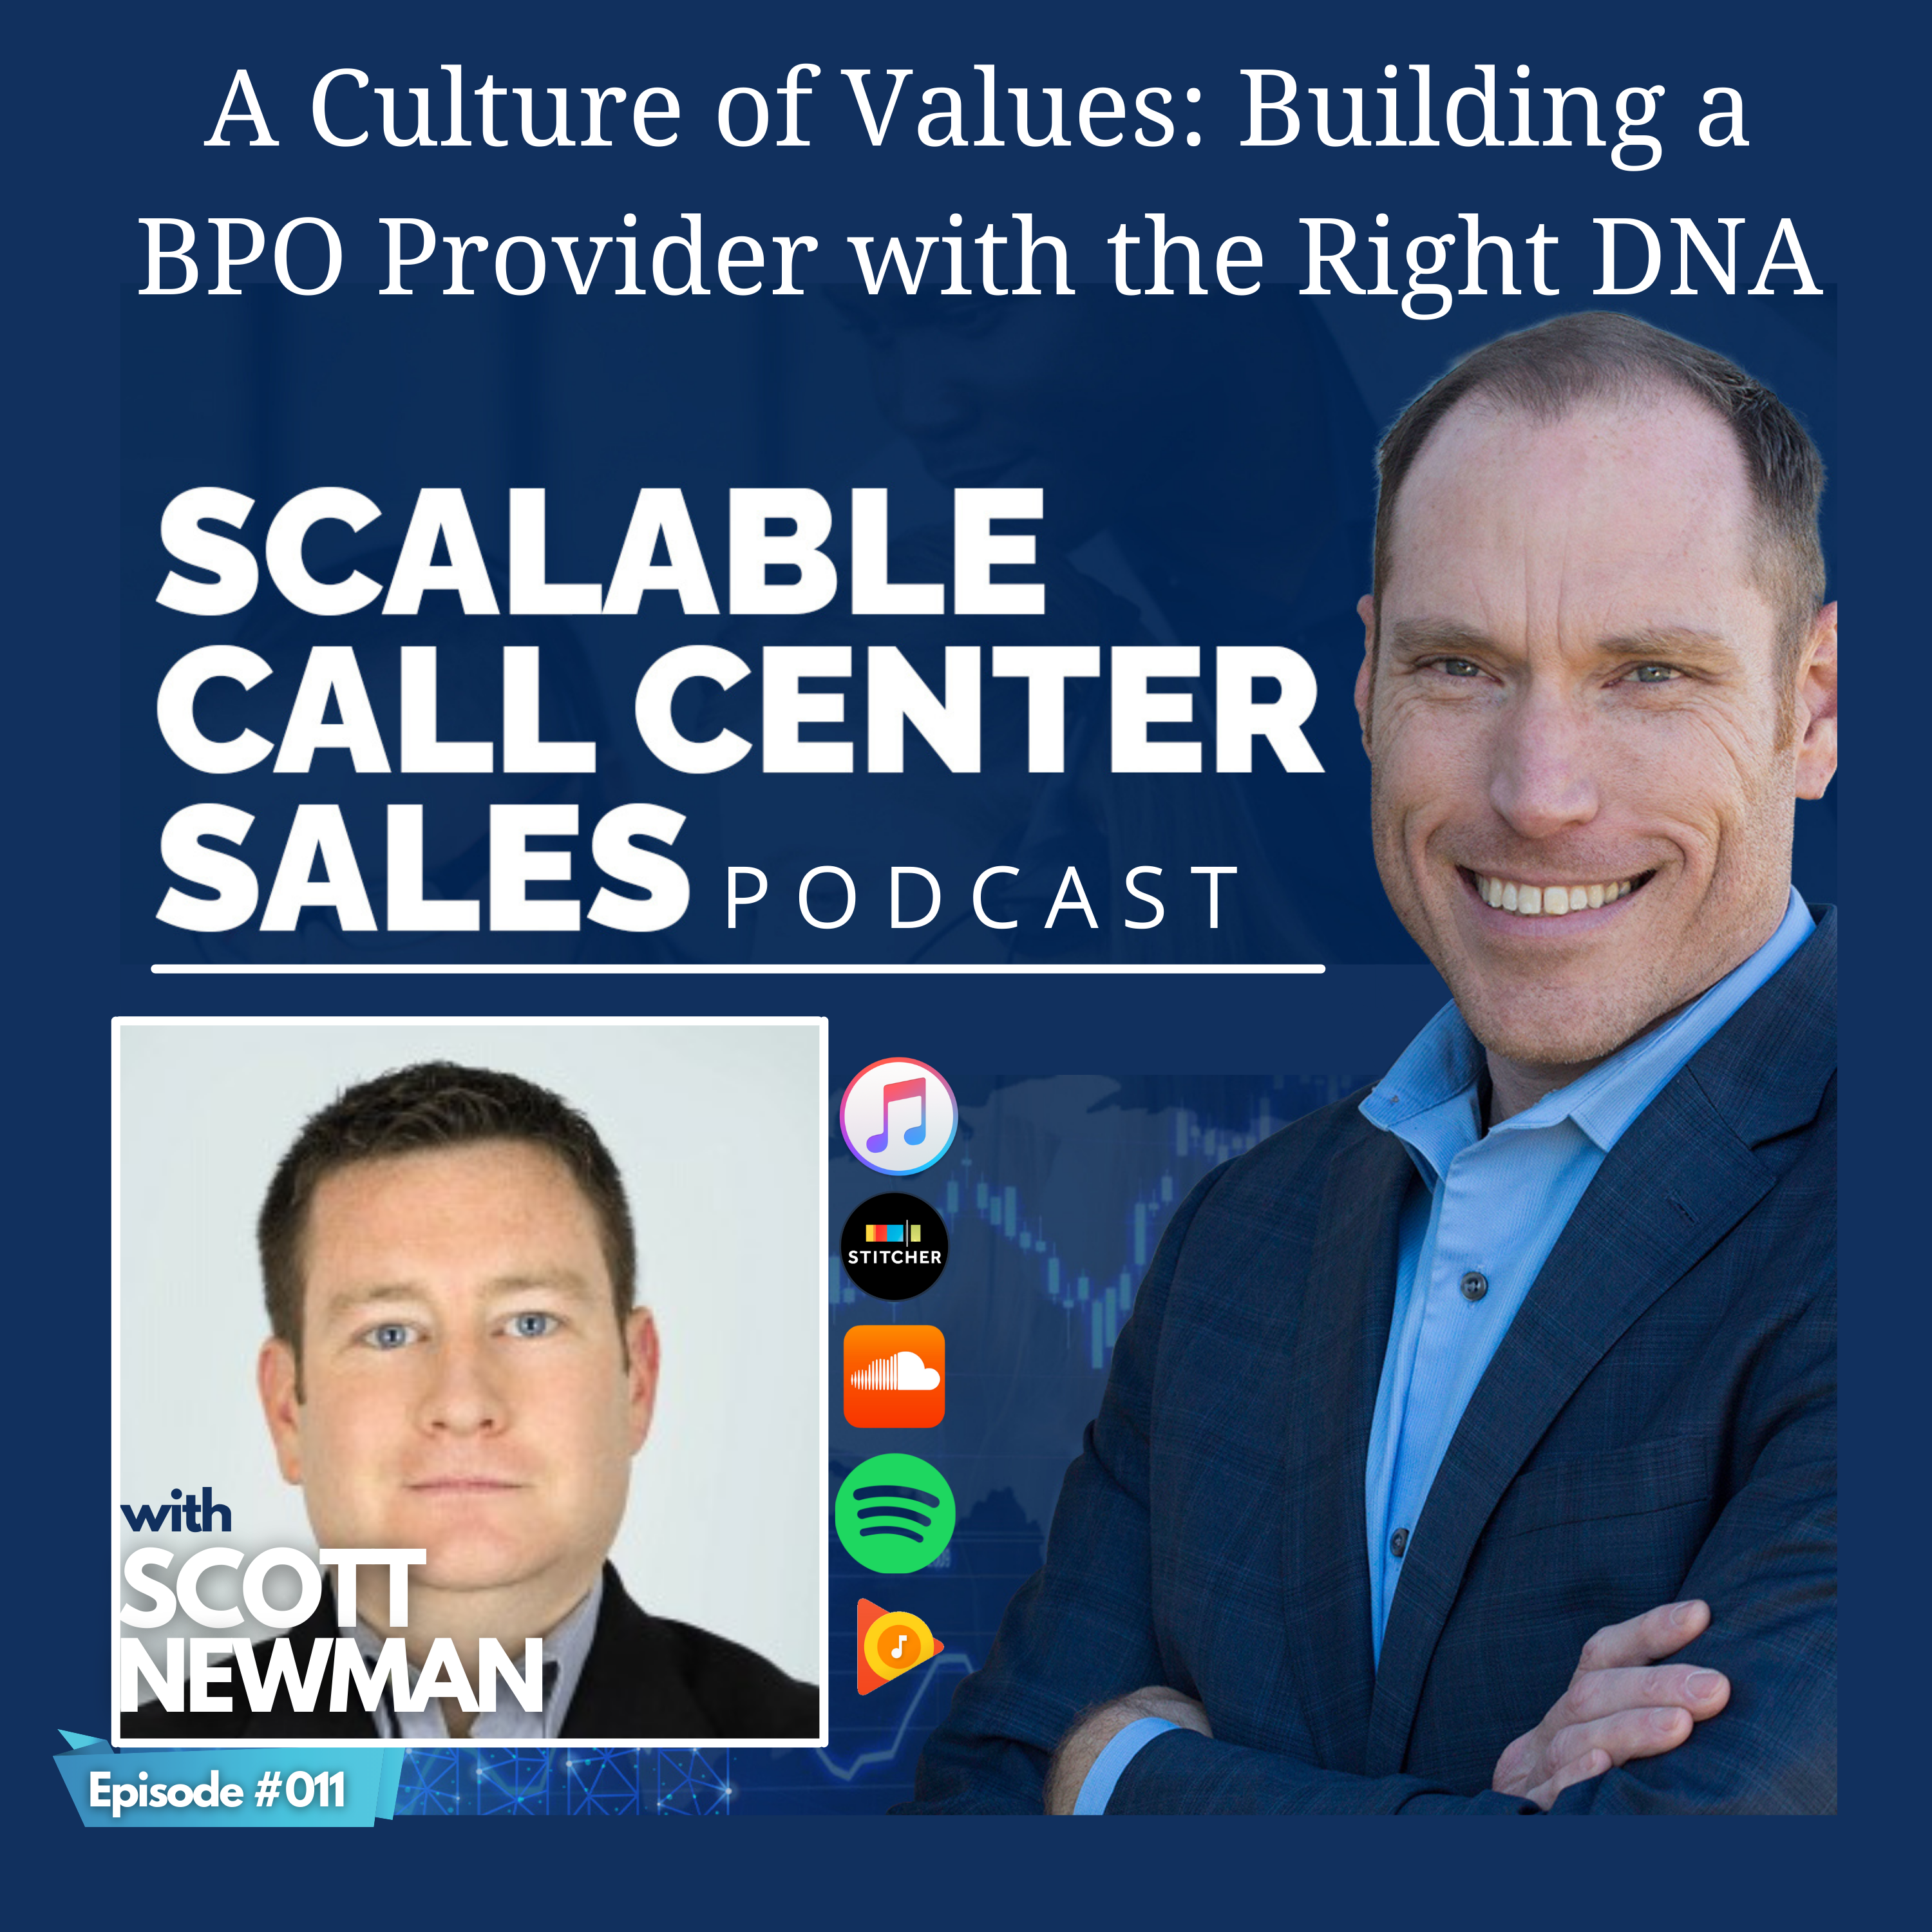 [011] A Culture of Values: Building a BPO Provider with the Right DNA, with Scott Newman from Transparent BPO